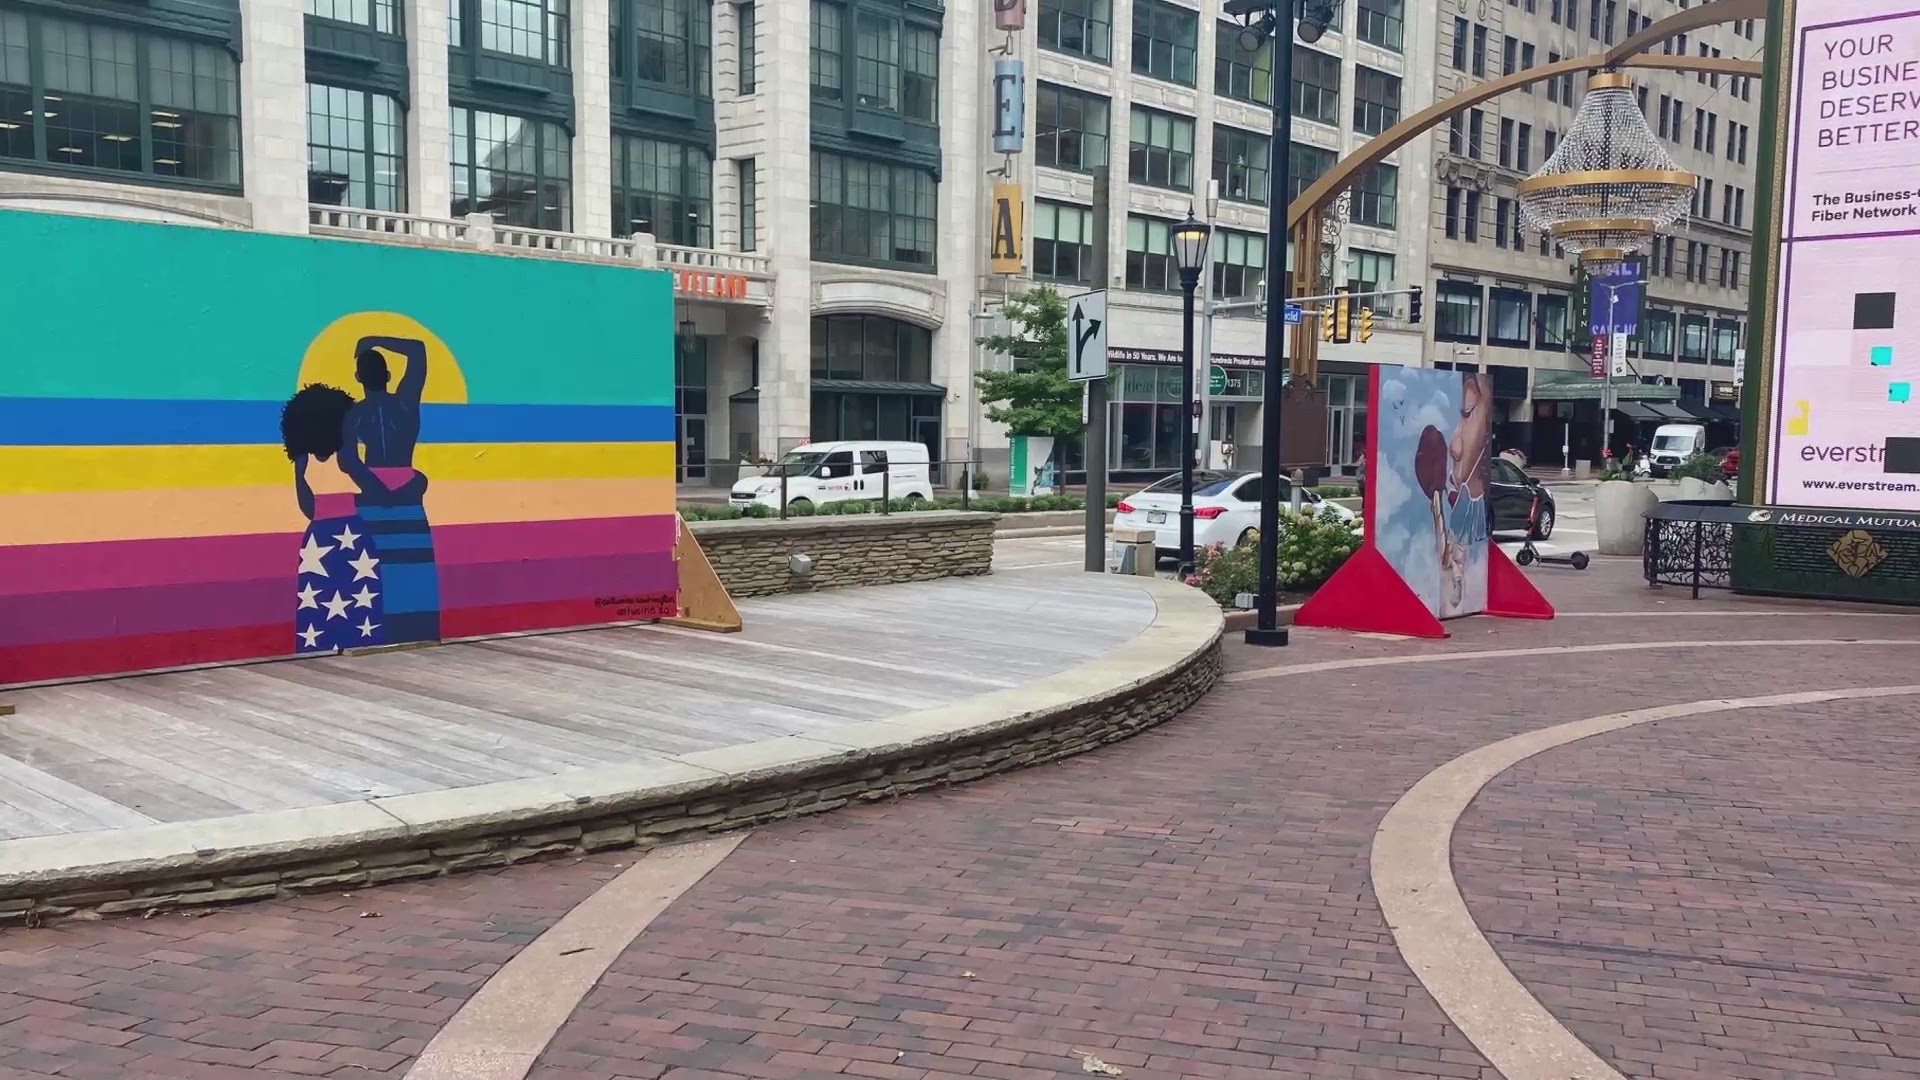 The mural series was unveiled at the U.S. Bank Plaza pop-up gallery in downtown Cleveland. Pictures are courtesy of Downtown Cleveland Alliance.